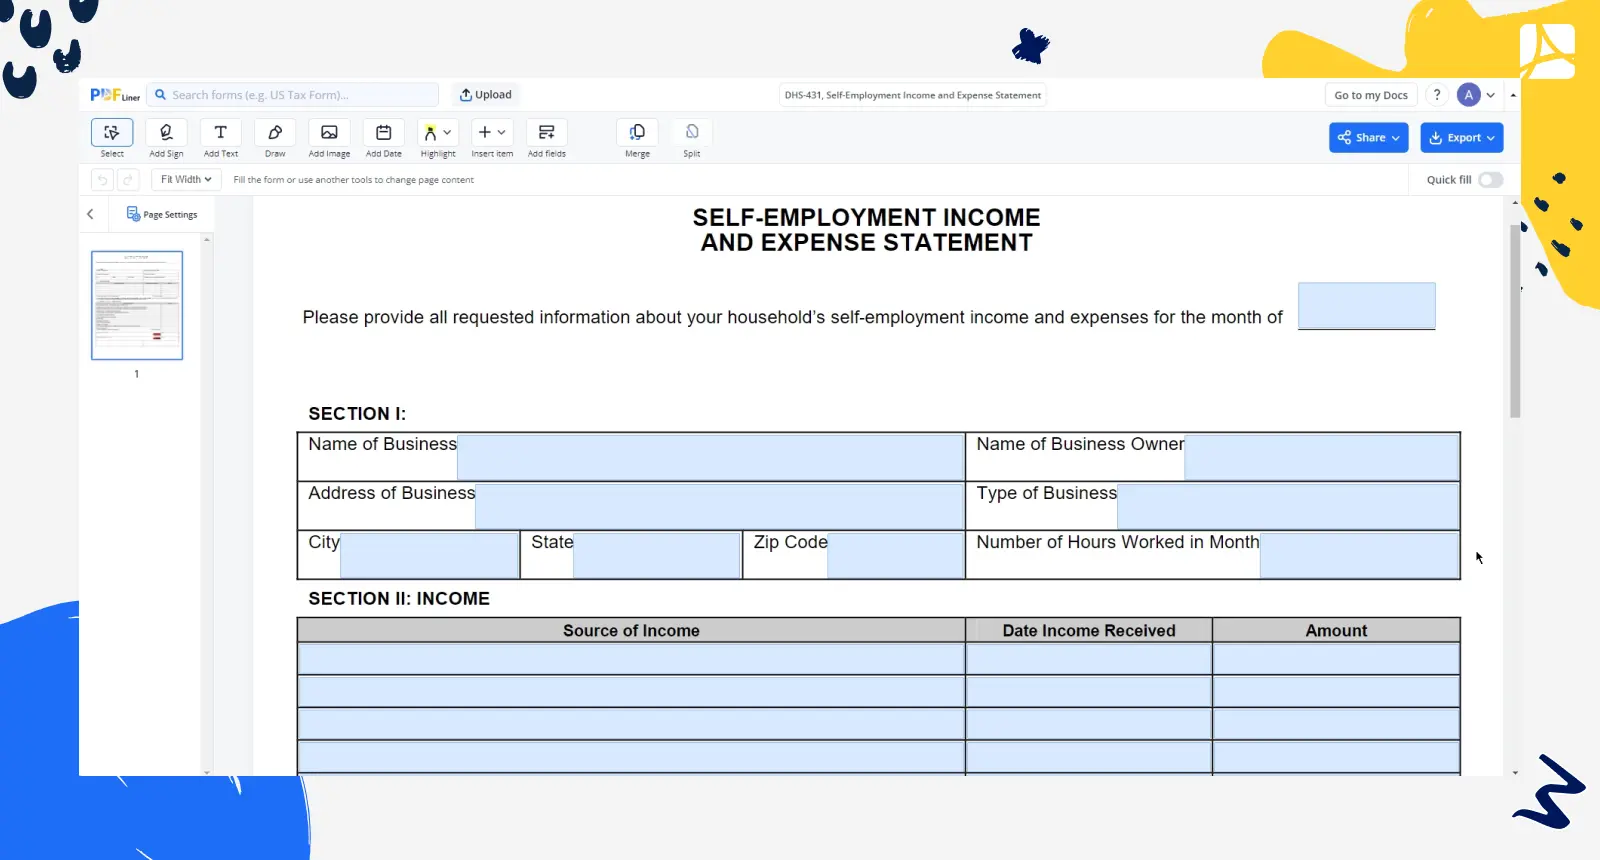 DHS-431, Self-Employment Income and Expense Statement screenshot